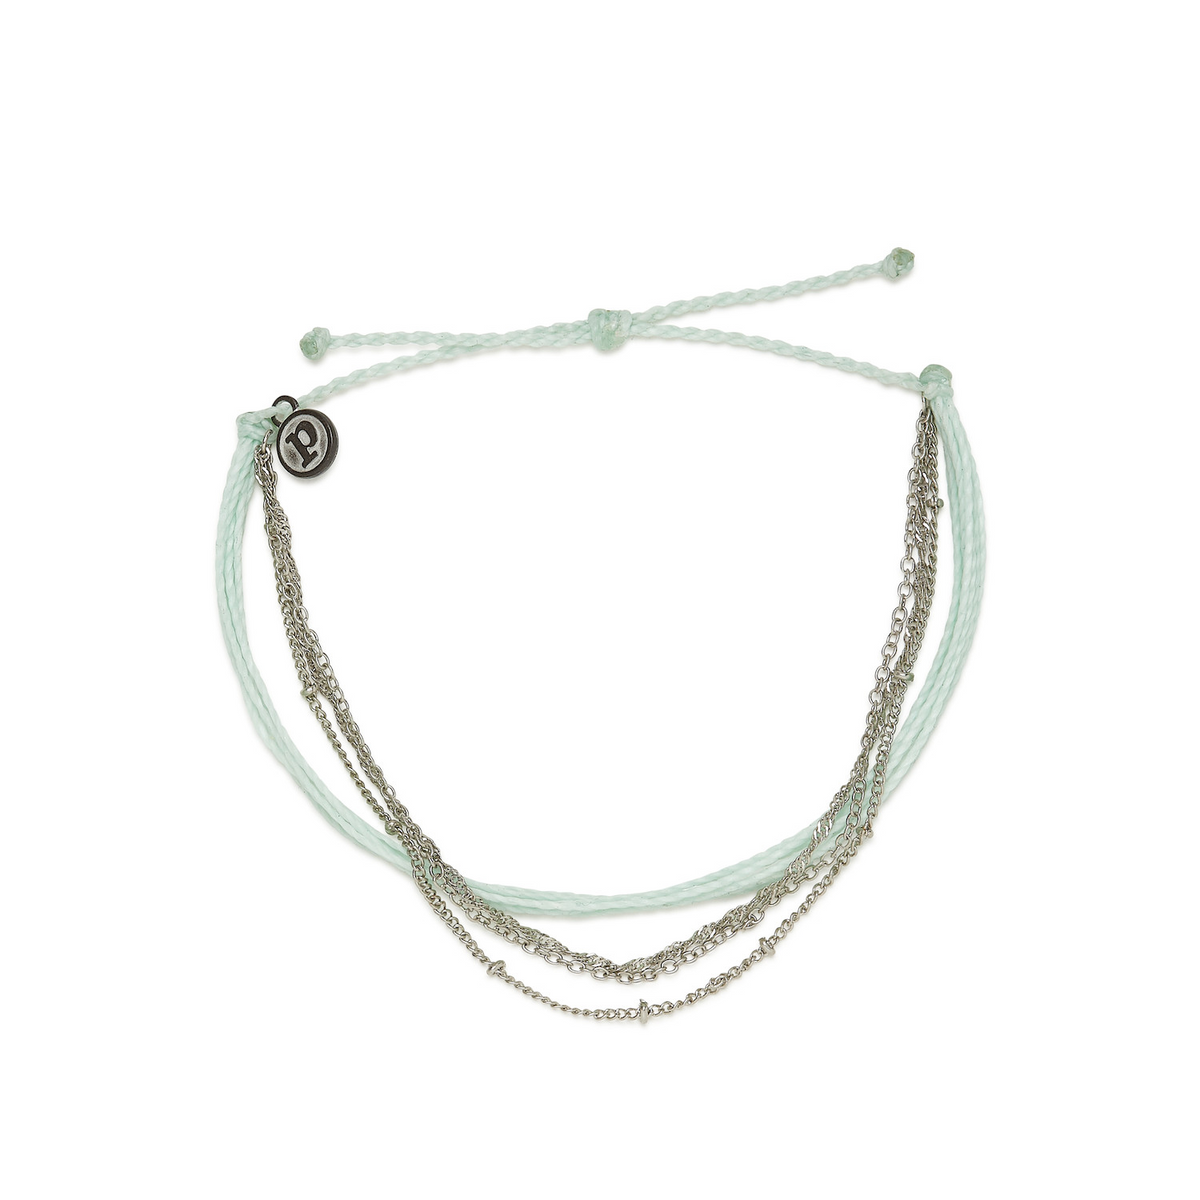 At Sea Mixed Chain SL Cord Anklet in Winter Fresh Pura Vida--Lemons and Limes Boutique